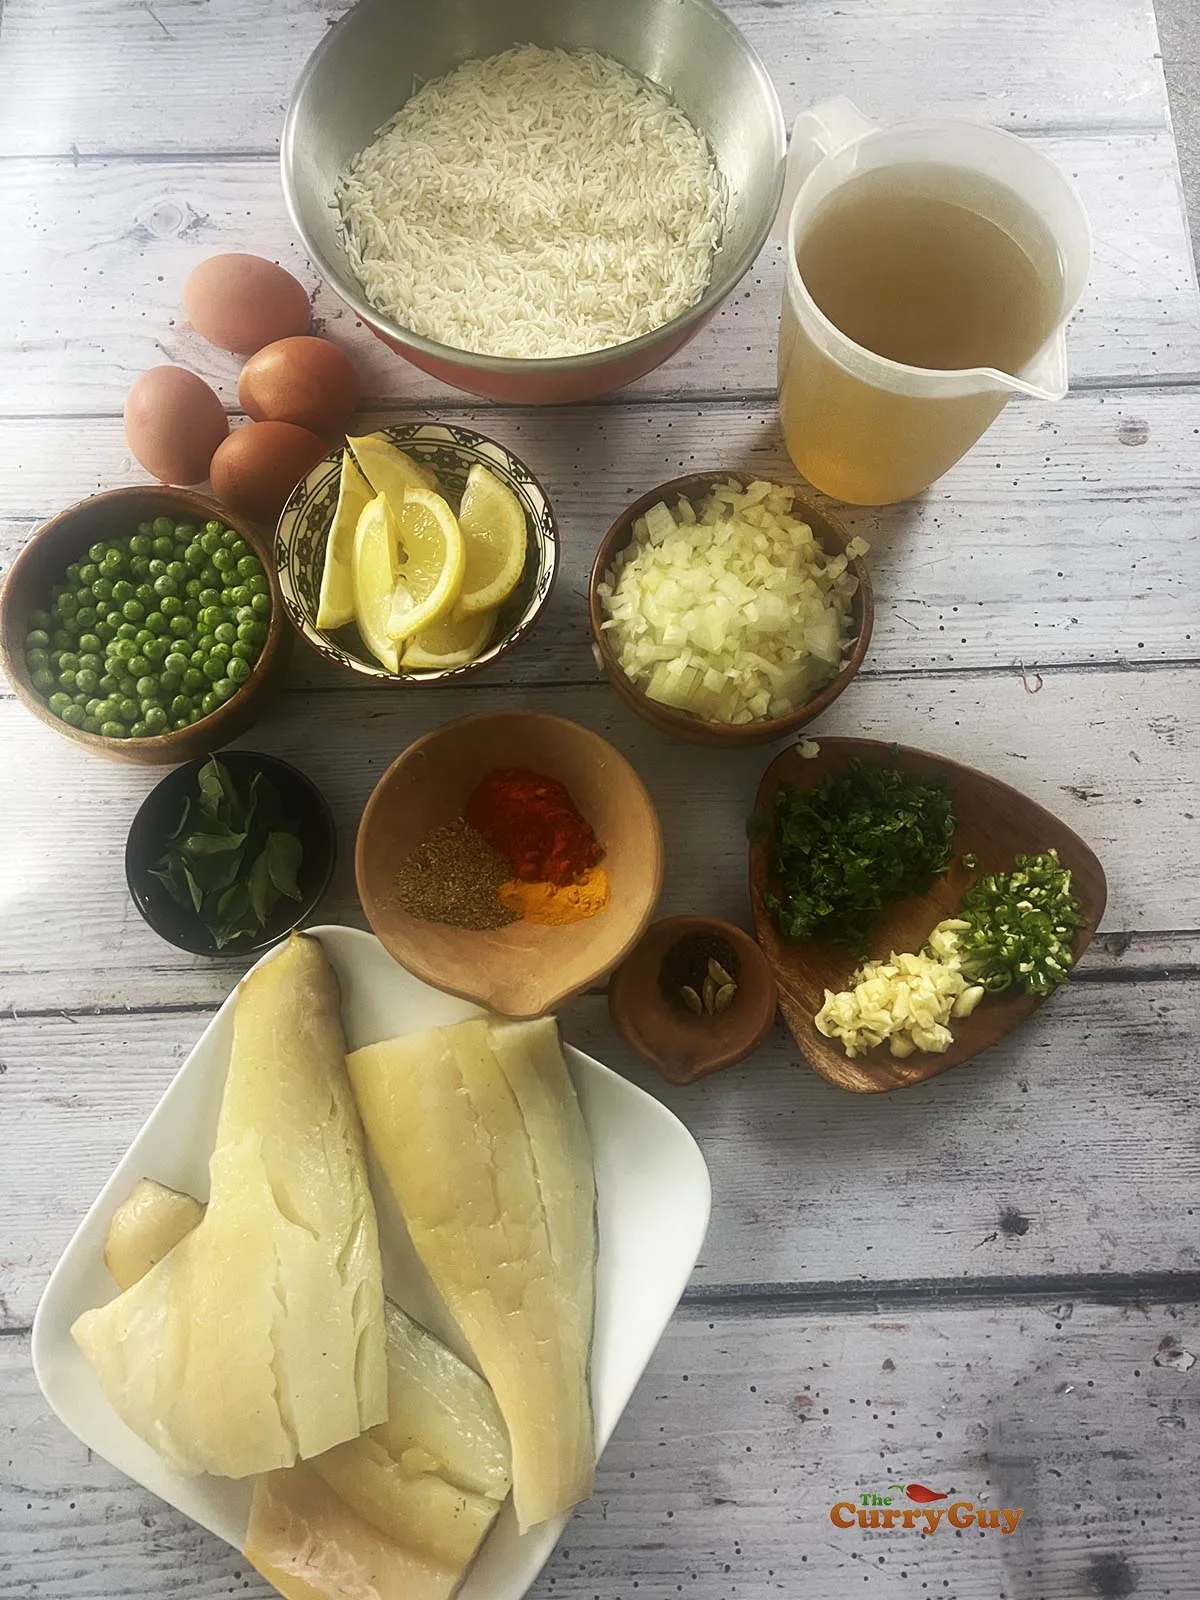 Ingredients for the kedgeree recipe